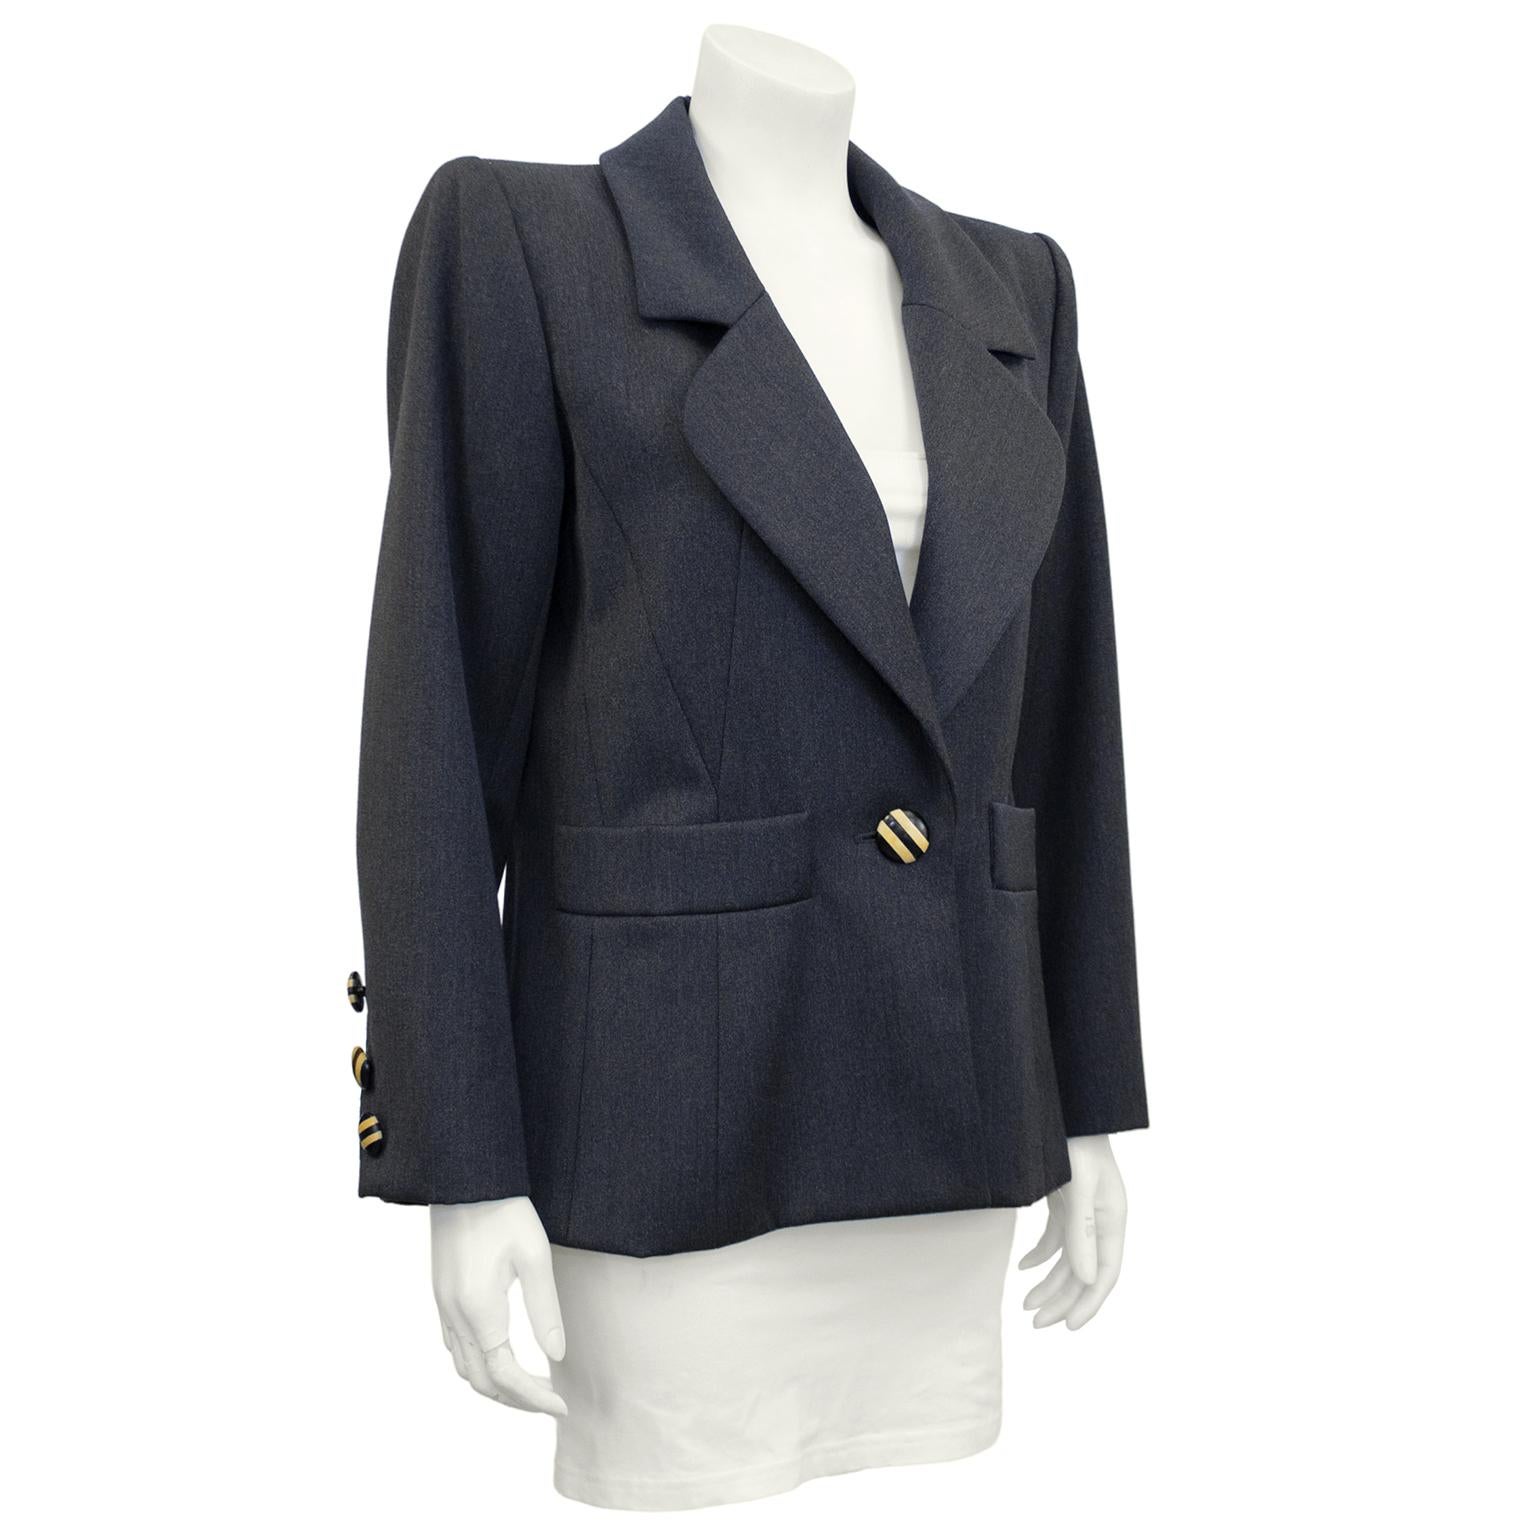 Early 1980s Yves Saint Laurent Rive Gauche blazer. Grey wool with interesting seaming to create a beautiful slightly fitted shape. Statement large striped wood buttons. Single button closure at centre front and three on each cuff. Excellent vintage